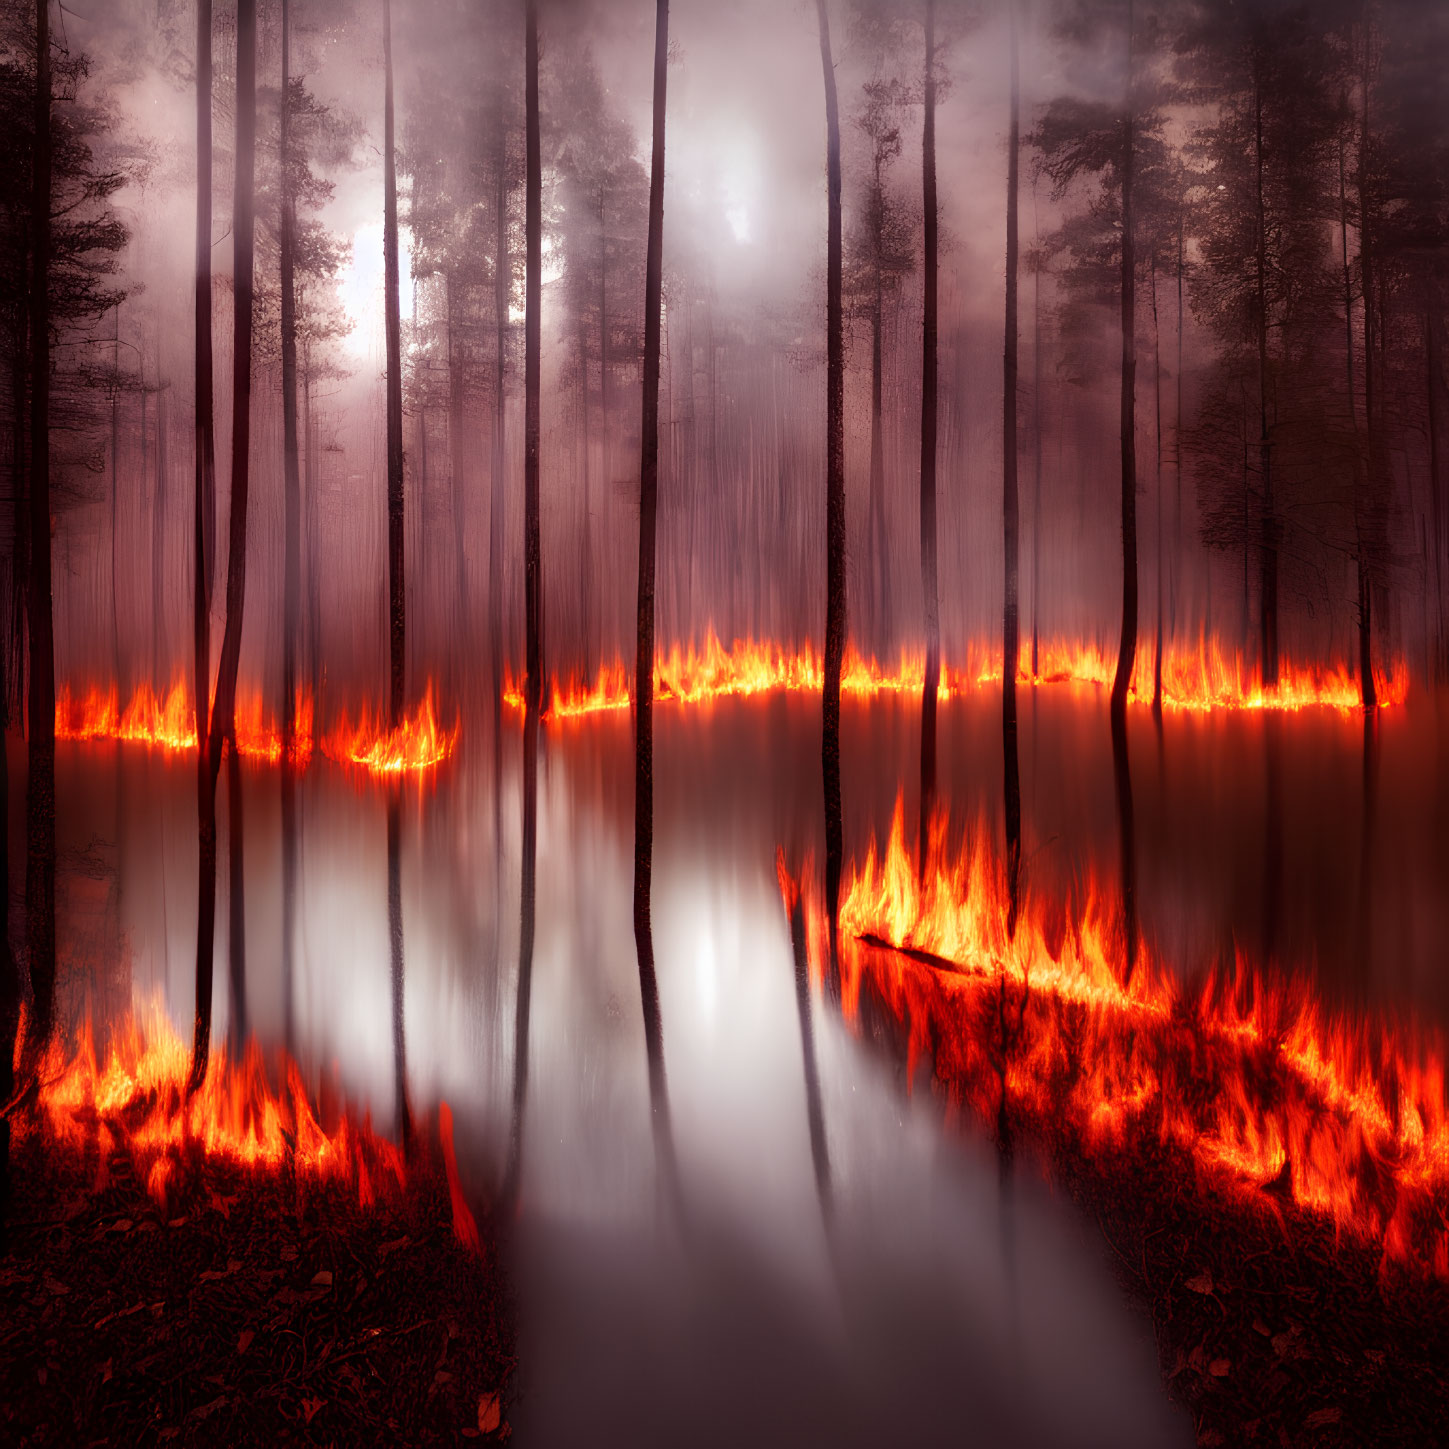 Surreal forest scene with mist, reflections, and intense fire contrast